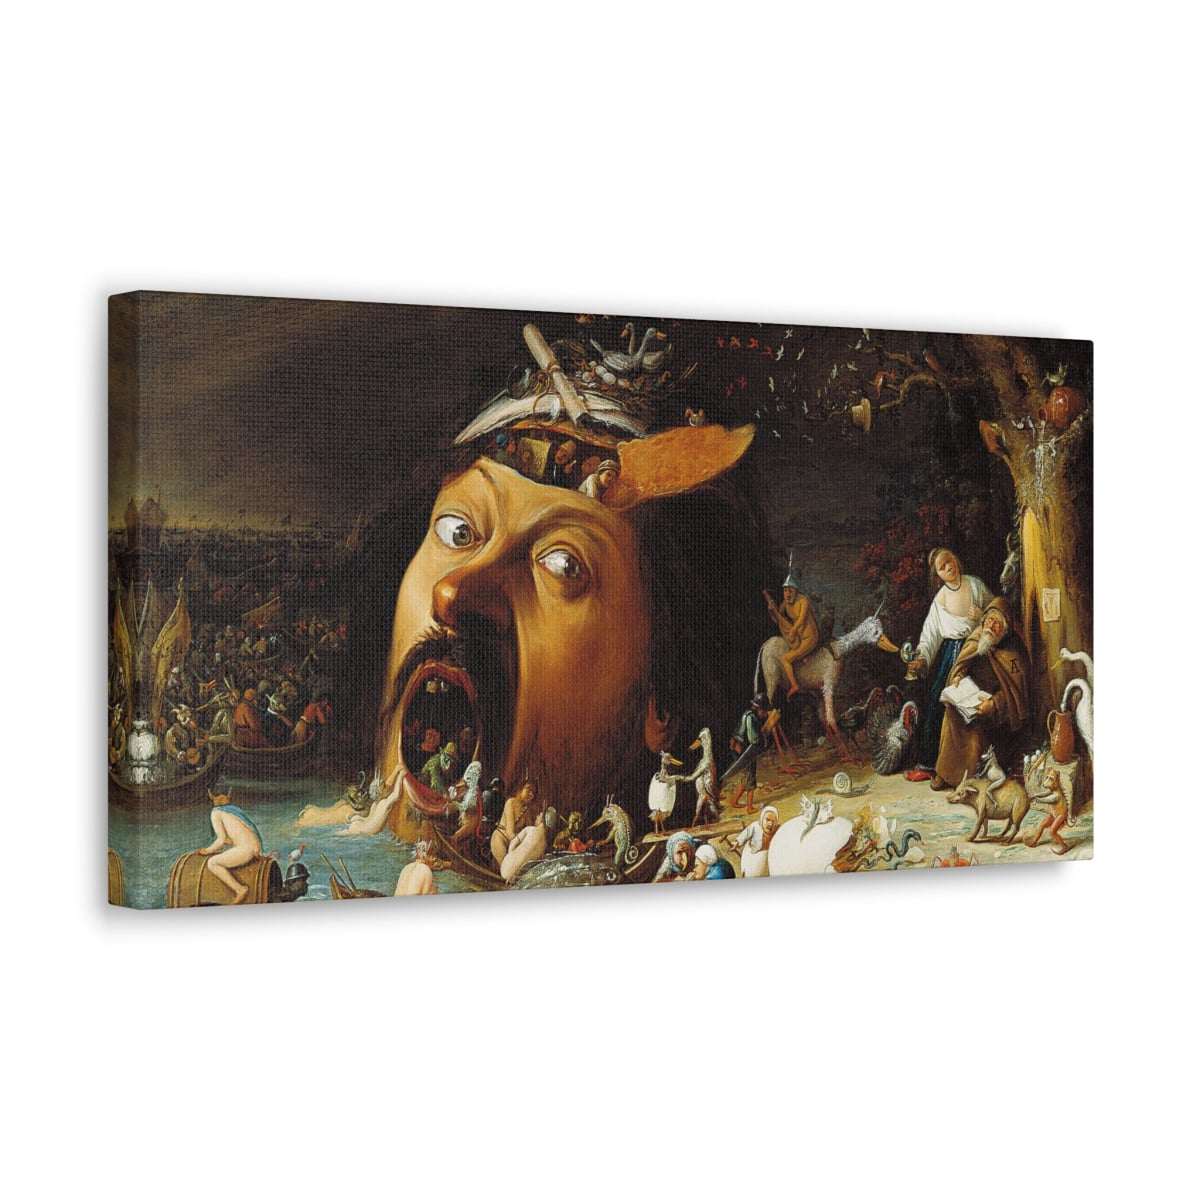 Hieronymus Bosch's Temptation of St. Anthony Canvas